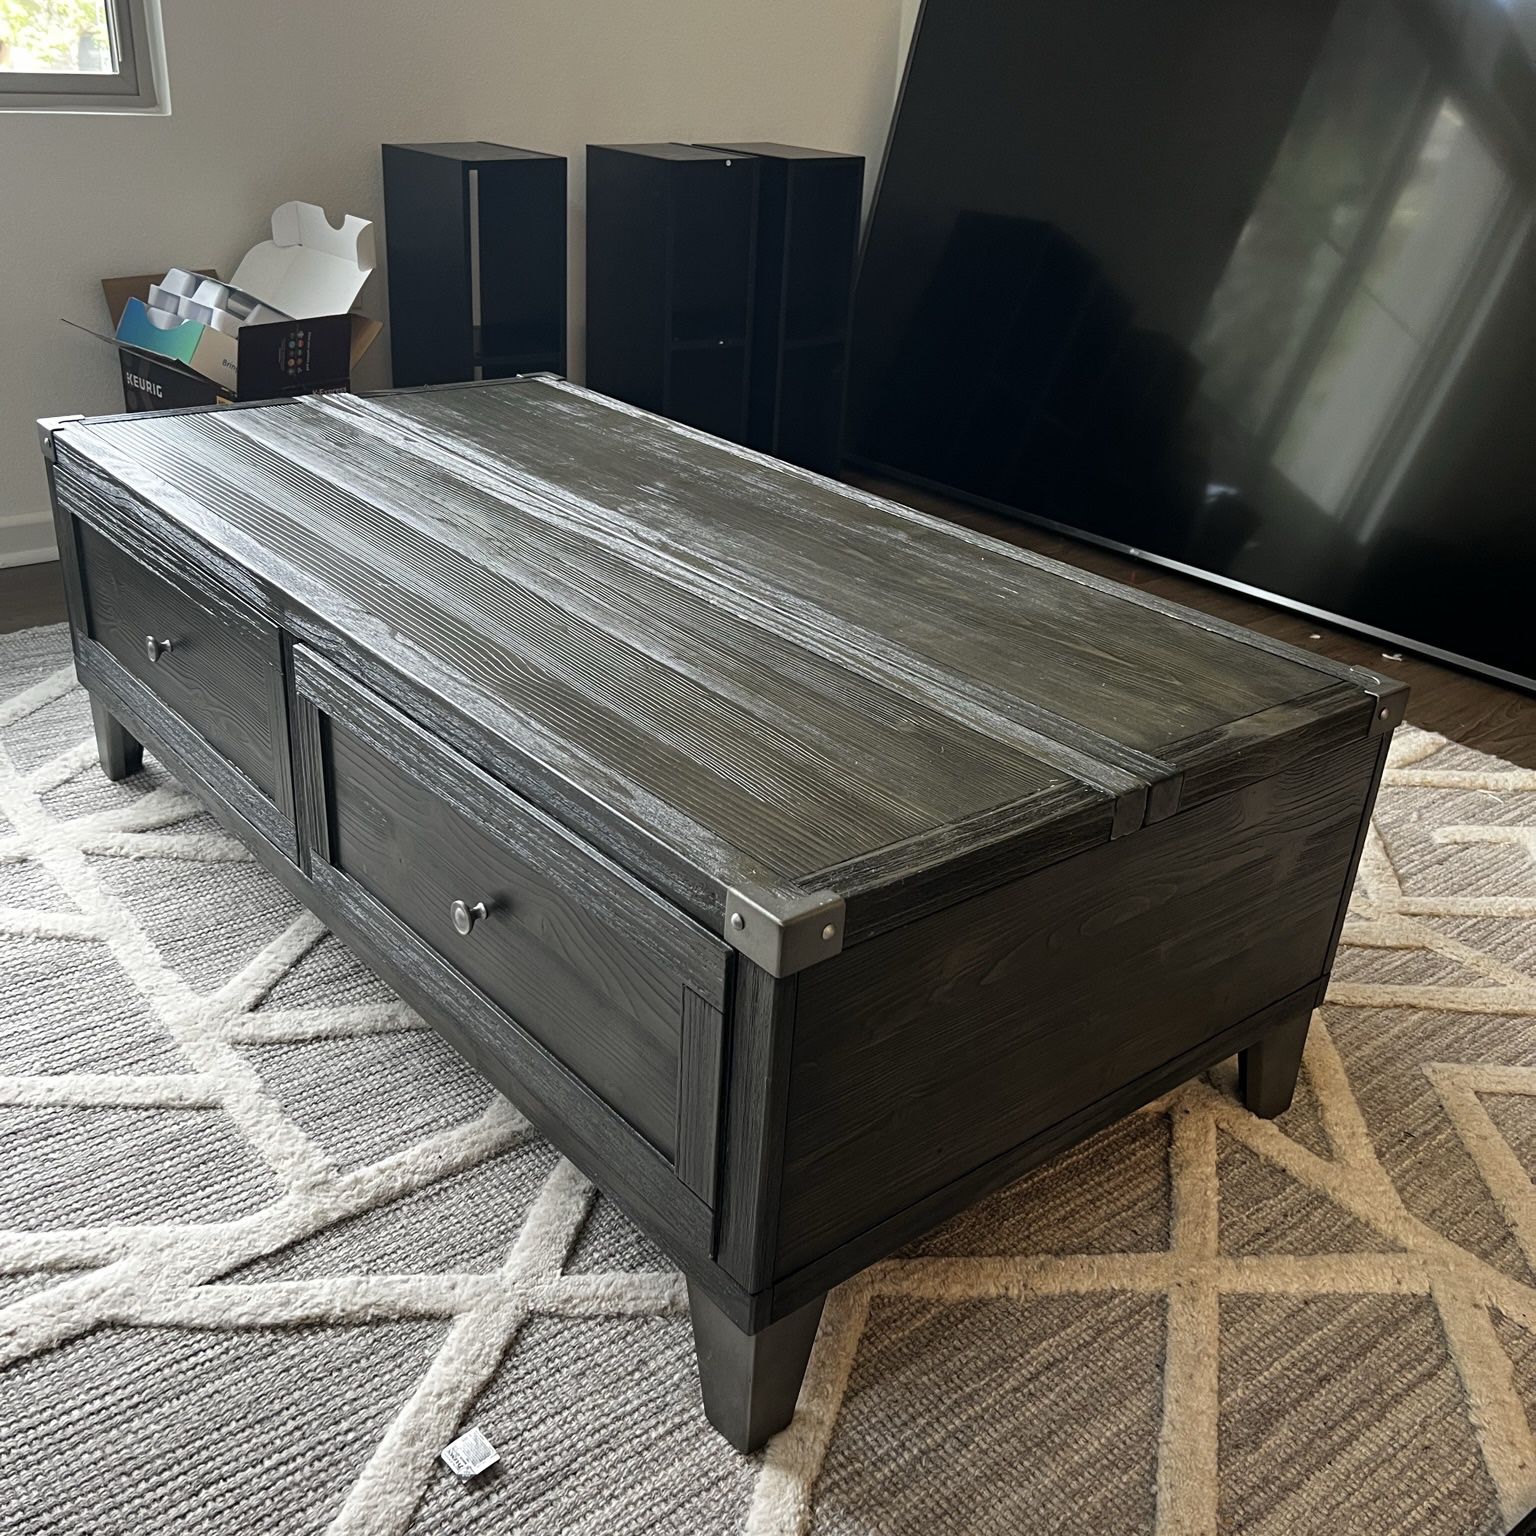 PRICE CUT $$$$ Lift Top Coffee Table With Drawers Sale Price Cut $225